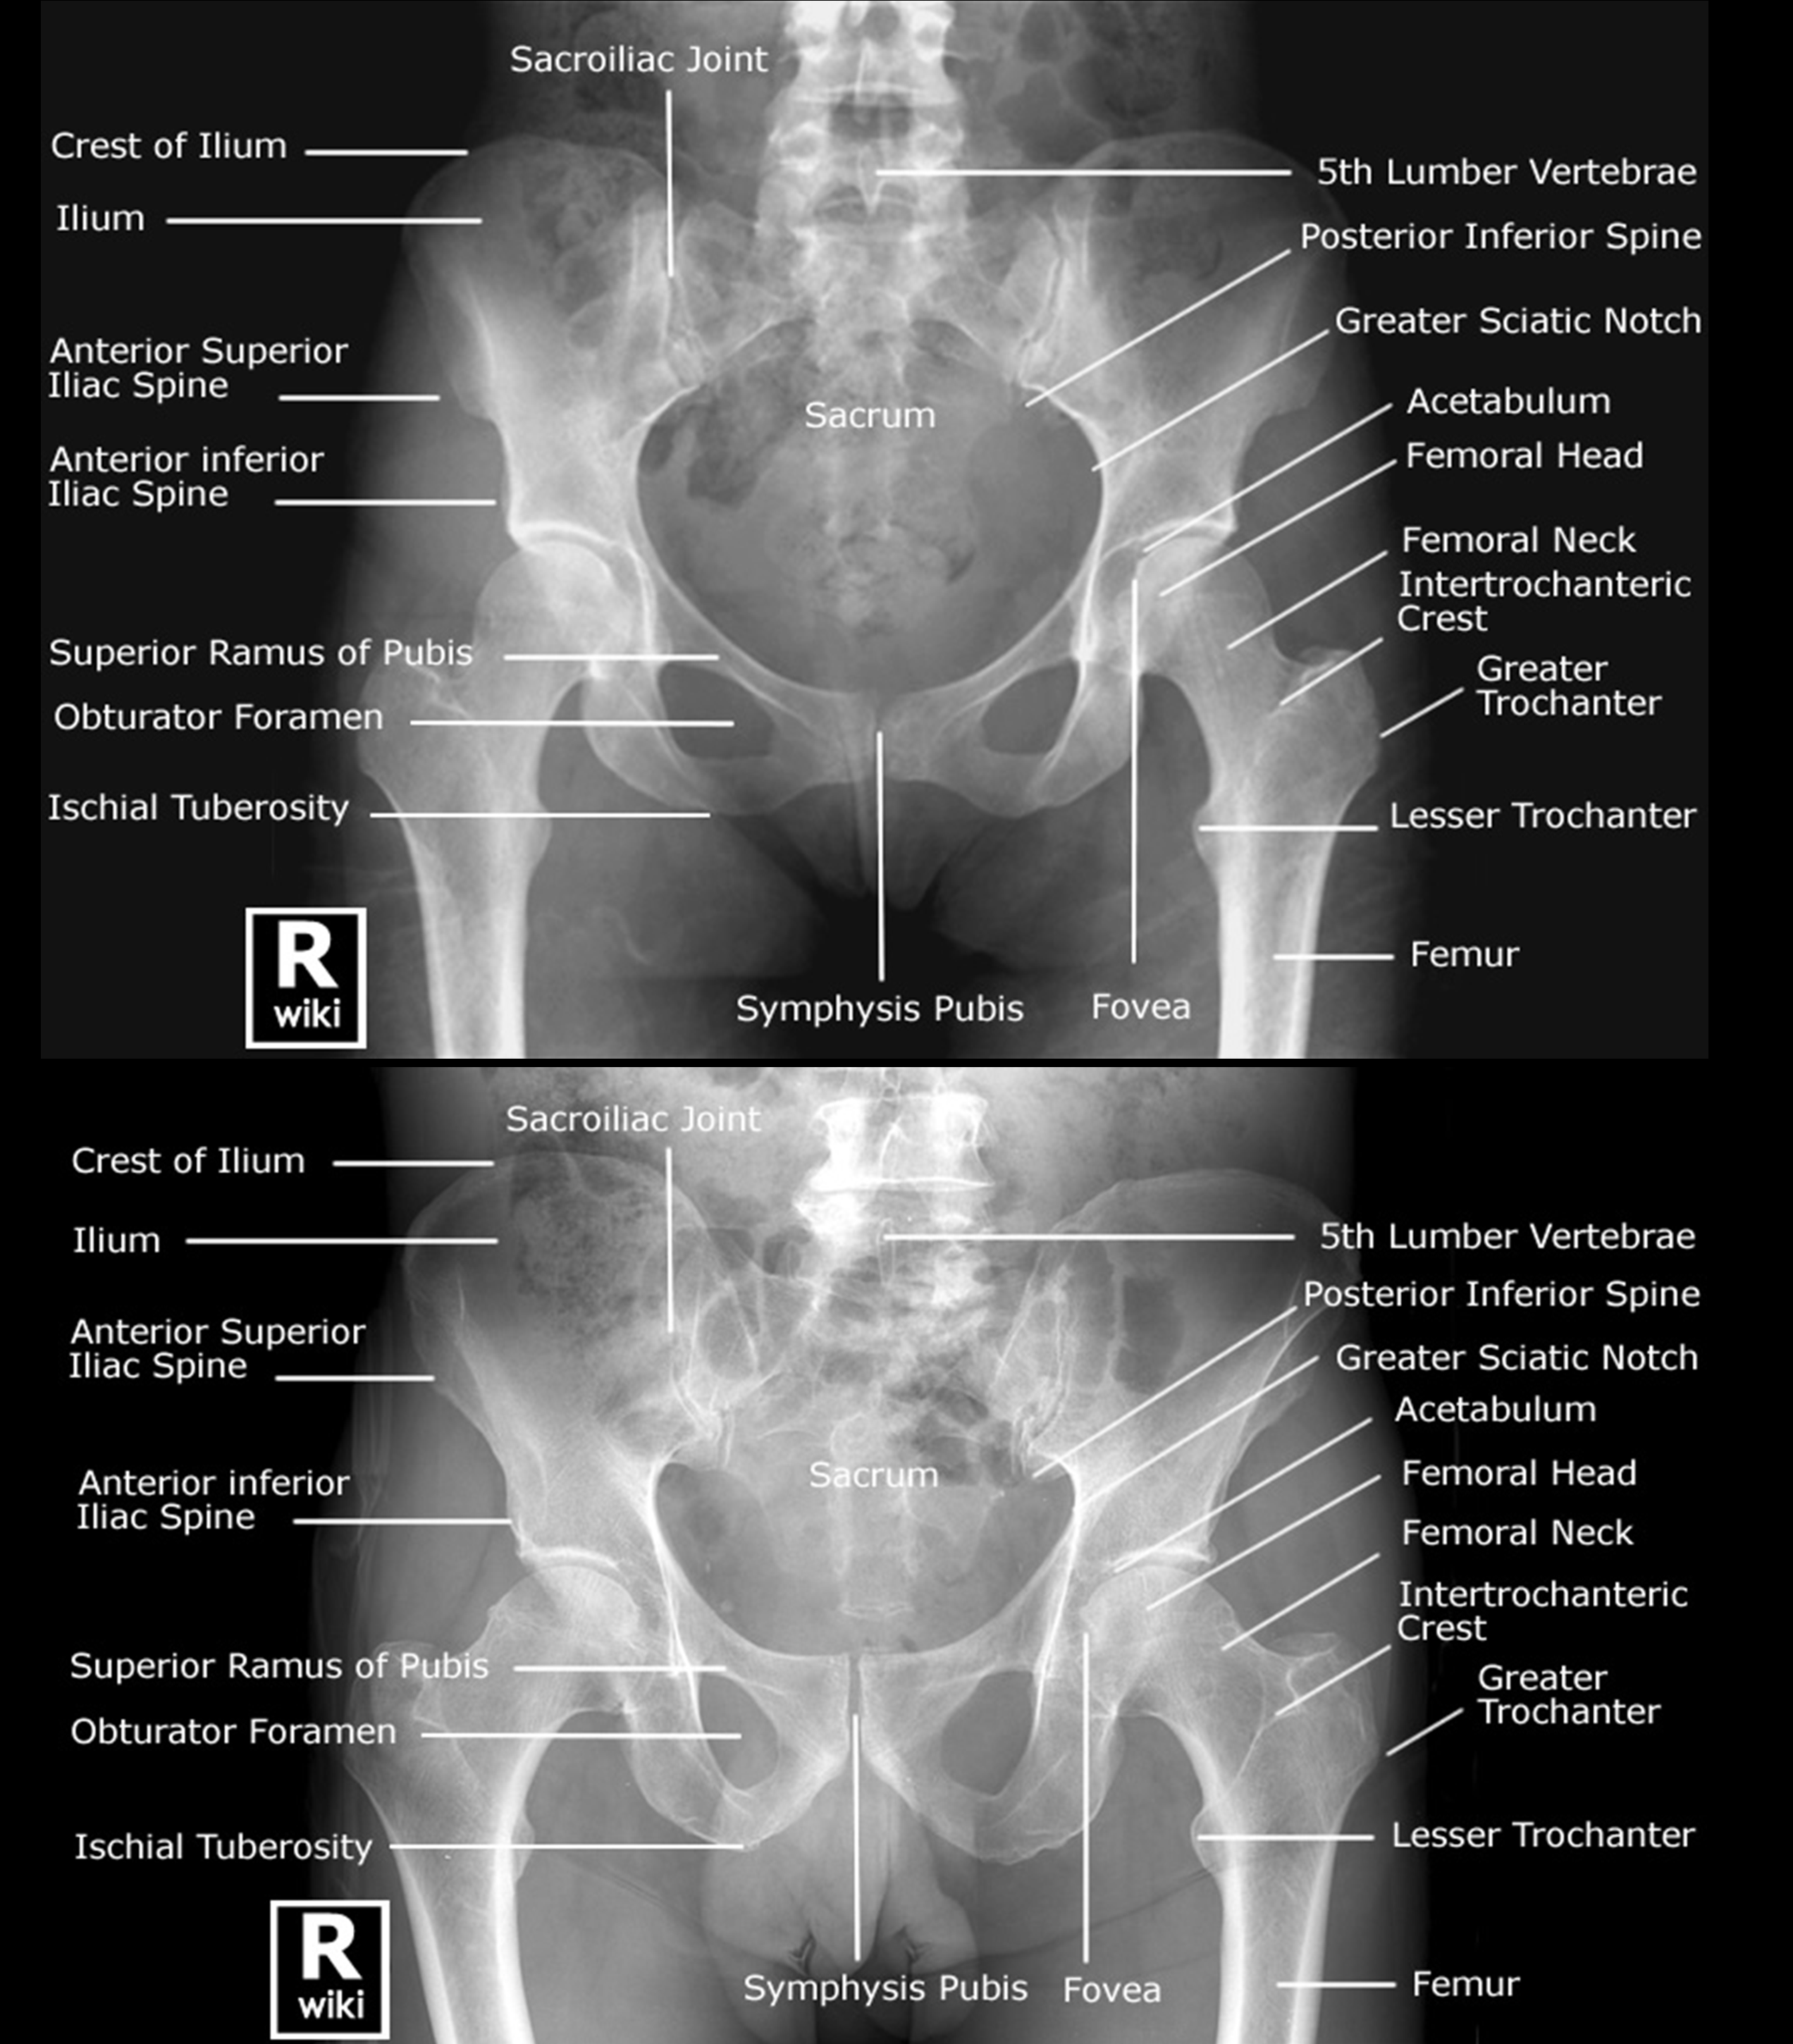 Labeled Radiographic Anatomy & Differences Between Male & Female Pelvis